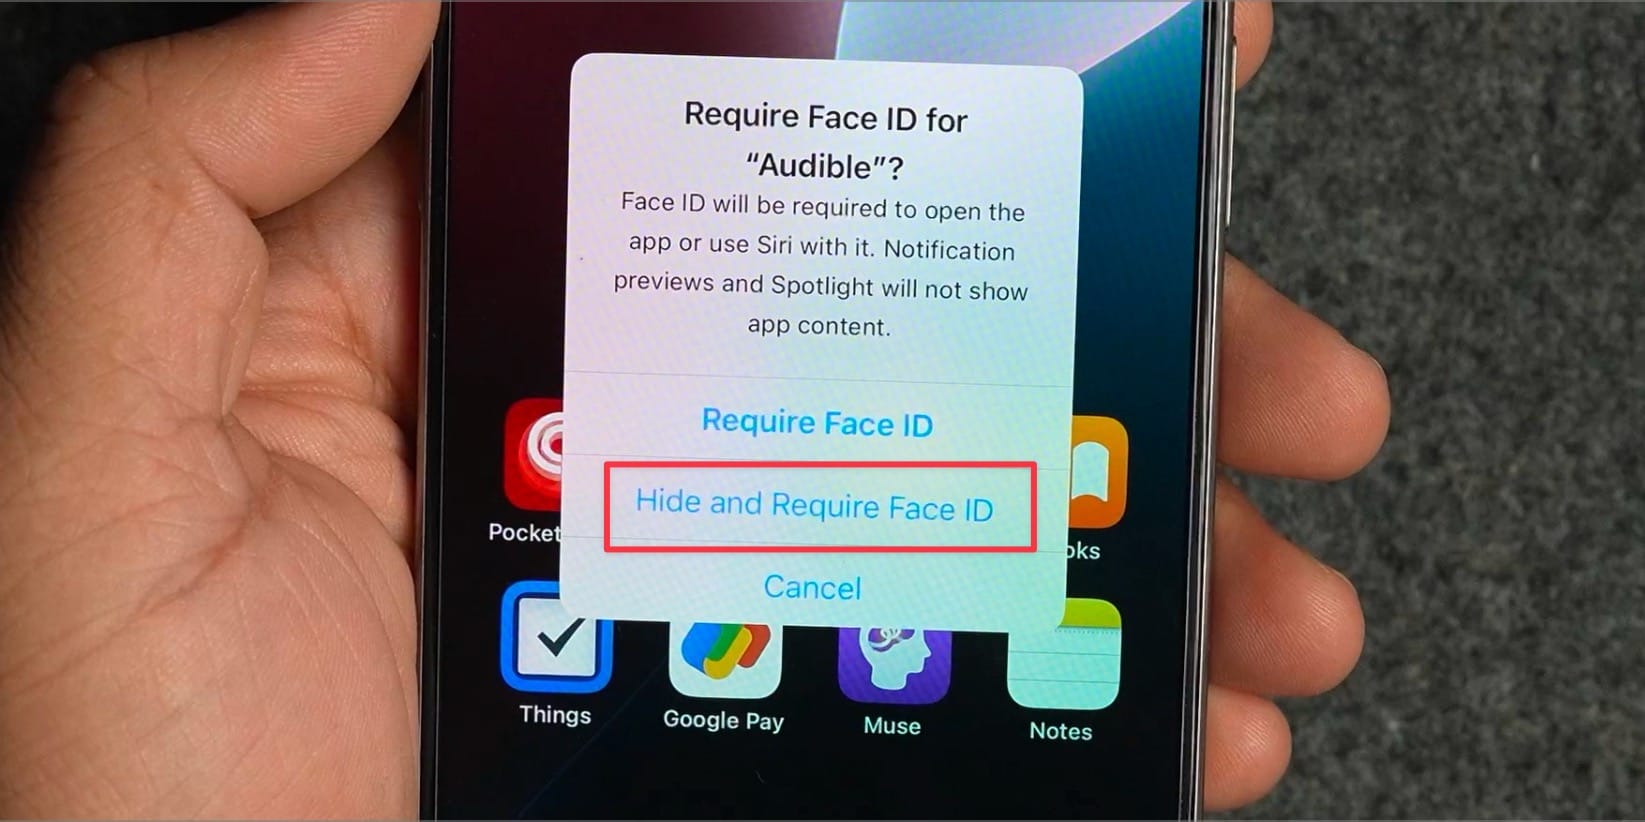 Hide and Require Face ID